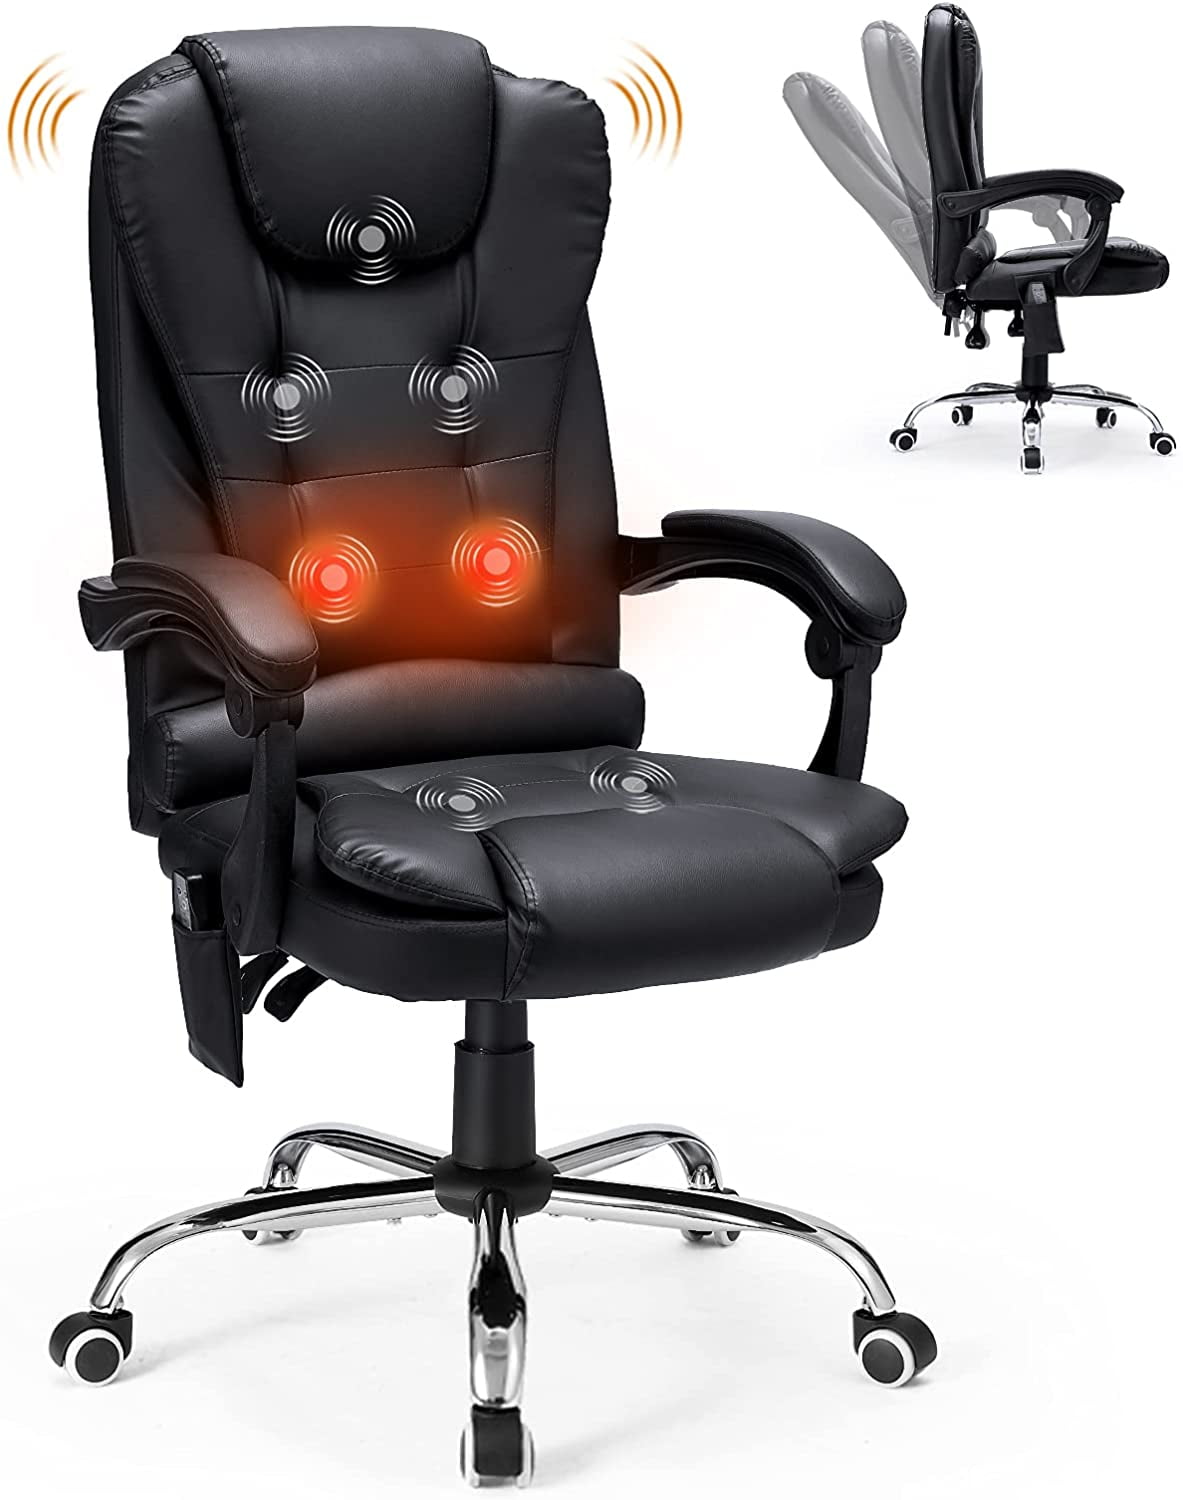 Heated Executive Computer Chair Black, Black Leather Massage Office Chair